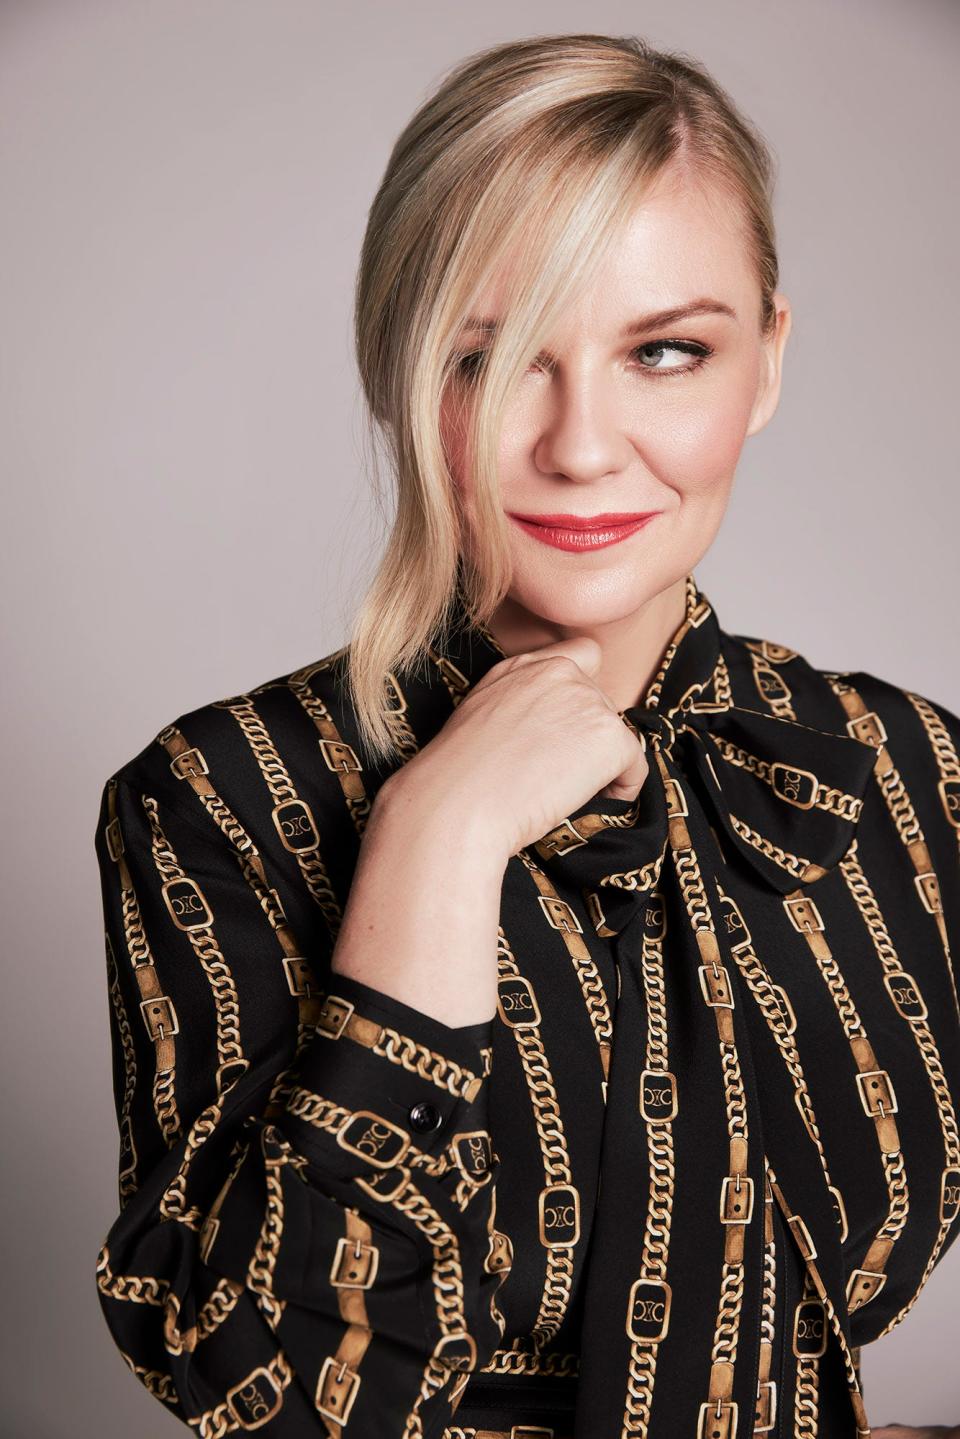 Kirsten Dunst, 39, is widely expected to earn her first Oscar nomination for "The Power of the Dog."